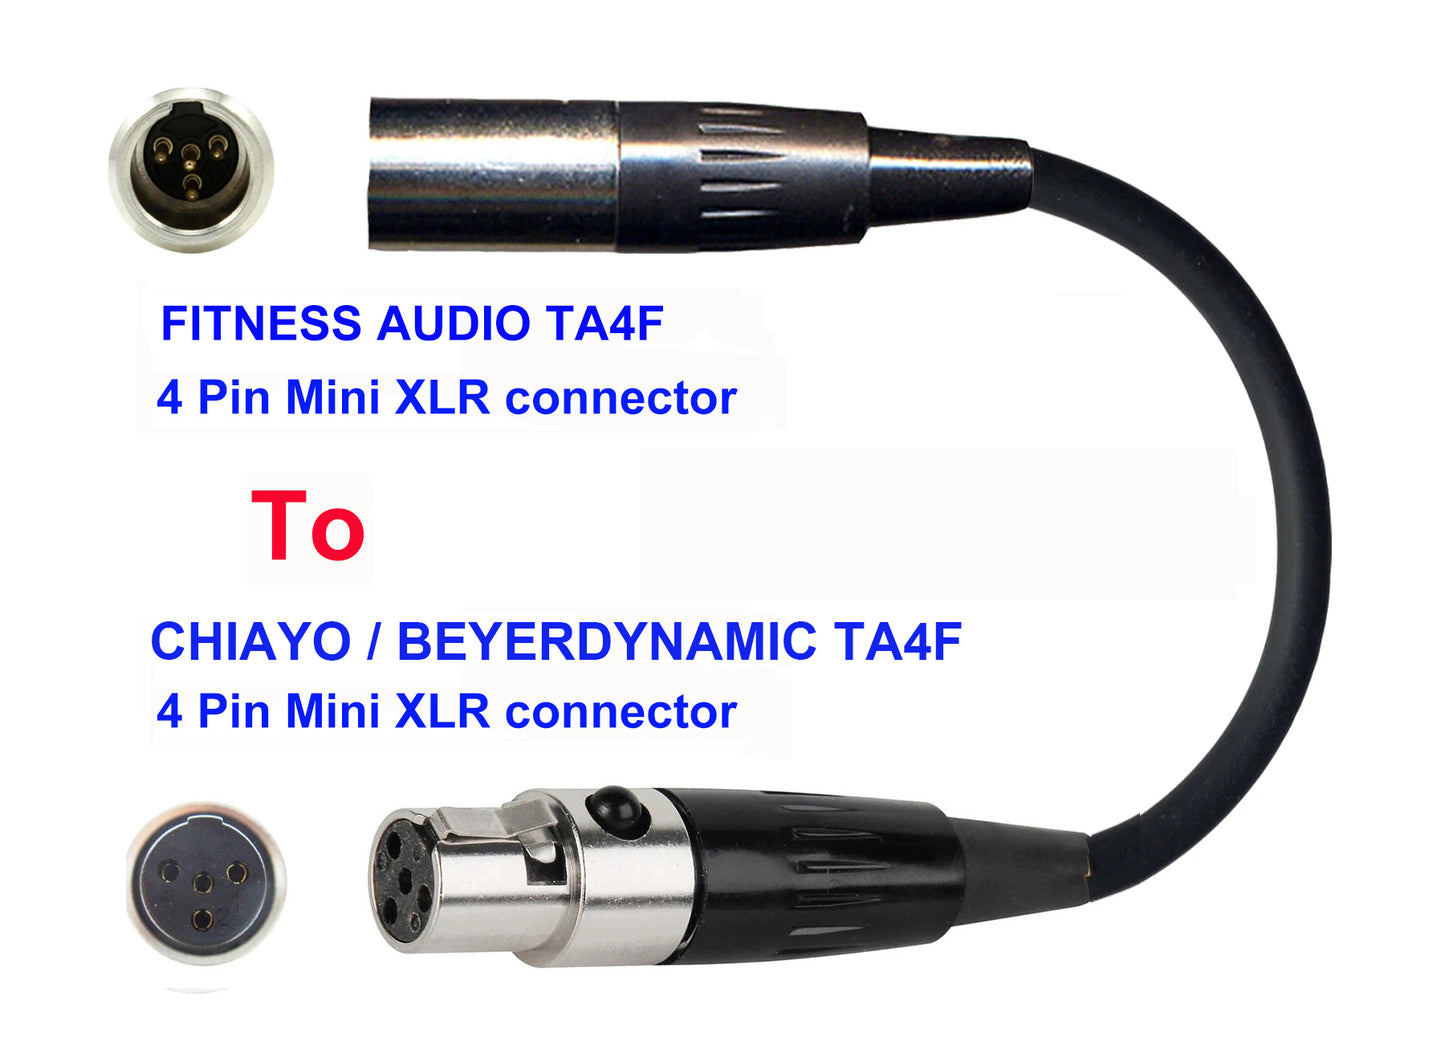 Microphone Adapter - Fitness Audio / Aeromic / Emic Microphones with TA4F 4 pin mini XLR connector TO Chiayo / JTS / Line6 / Beyerdynamic Transmitters with 4pin TA4M connector